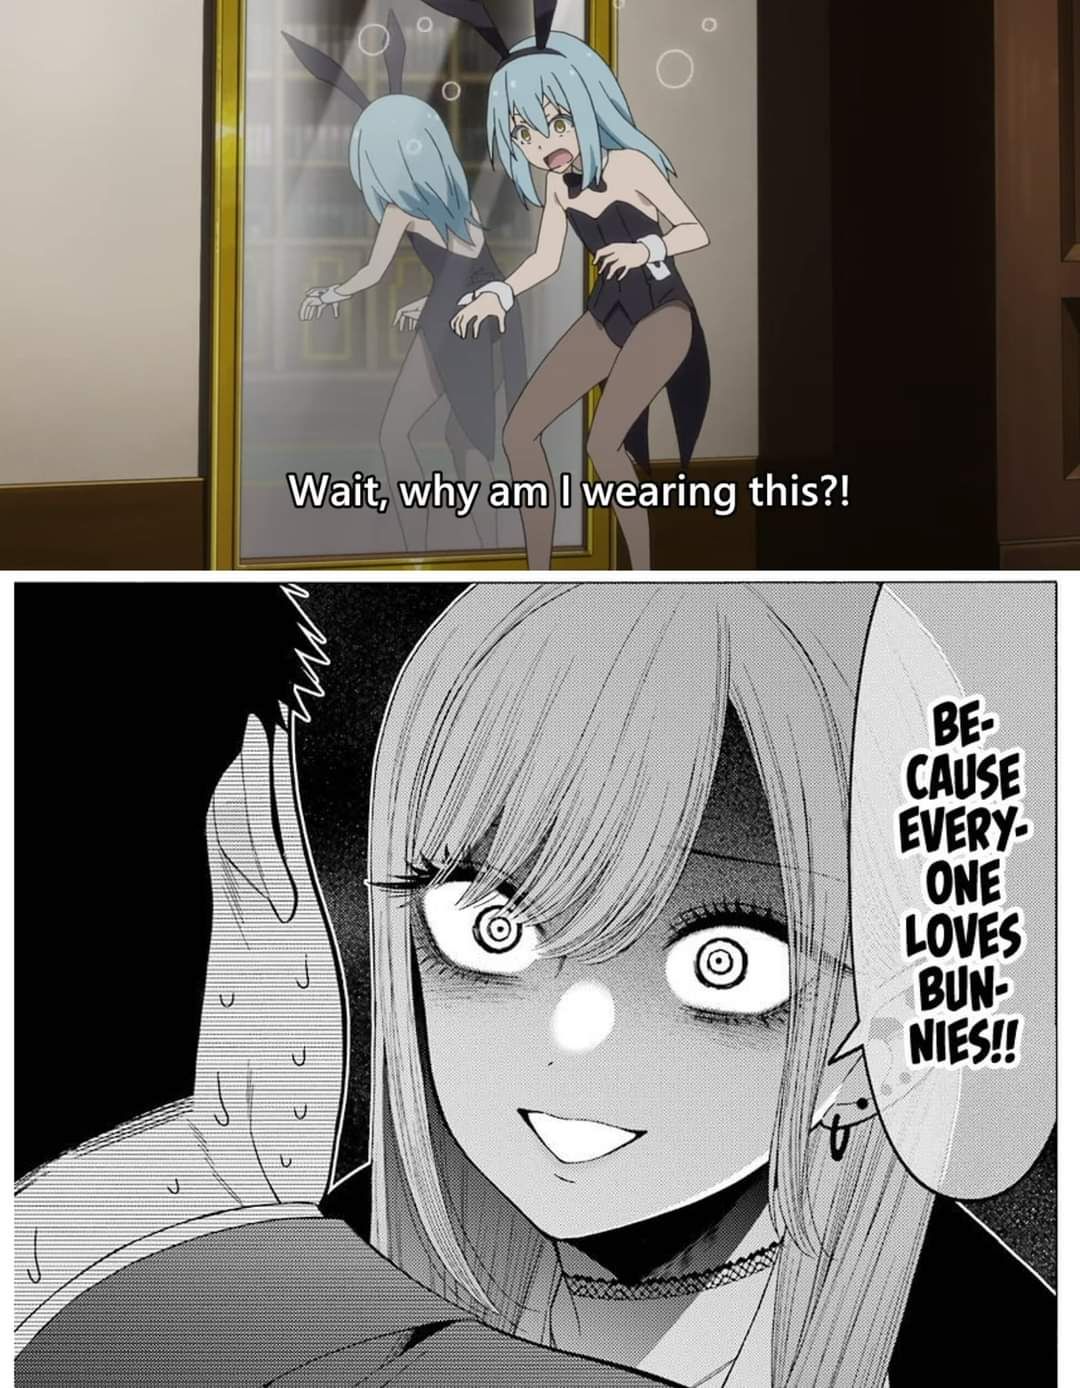 At this point Rimuru is now best girl